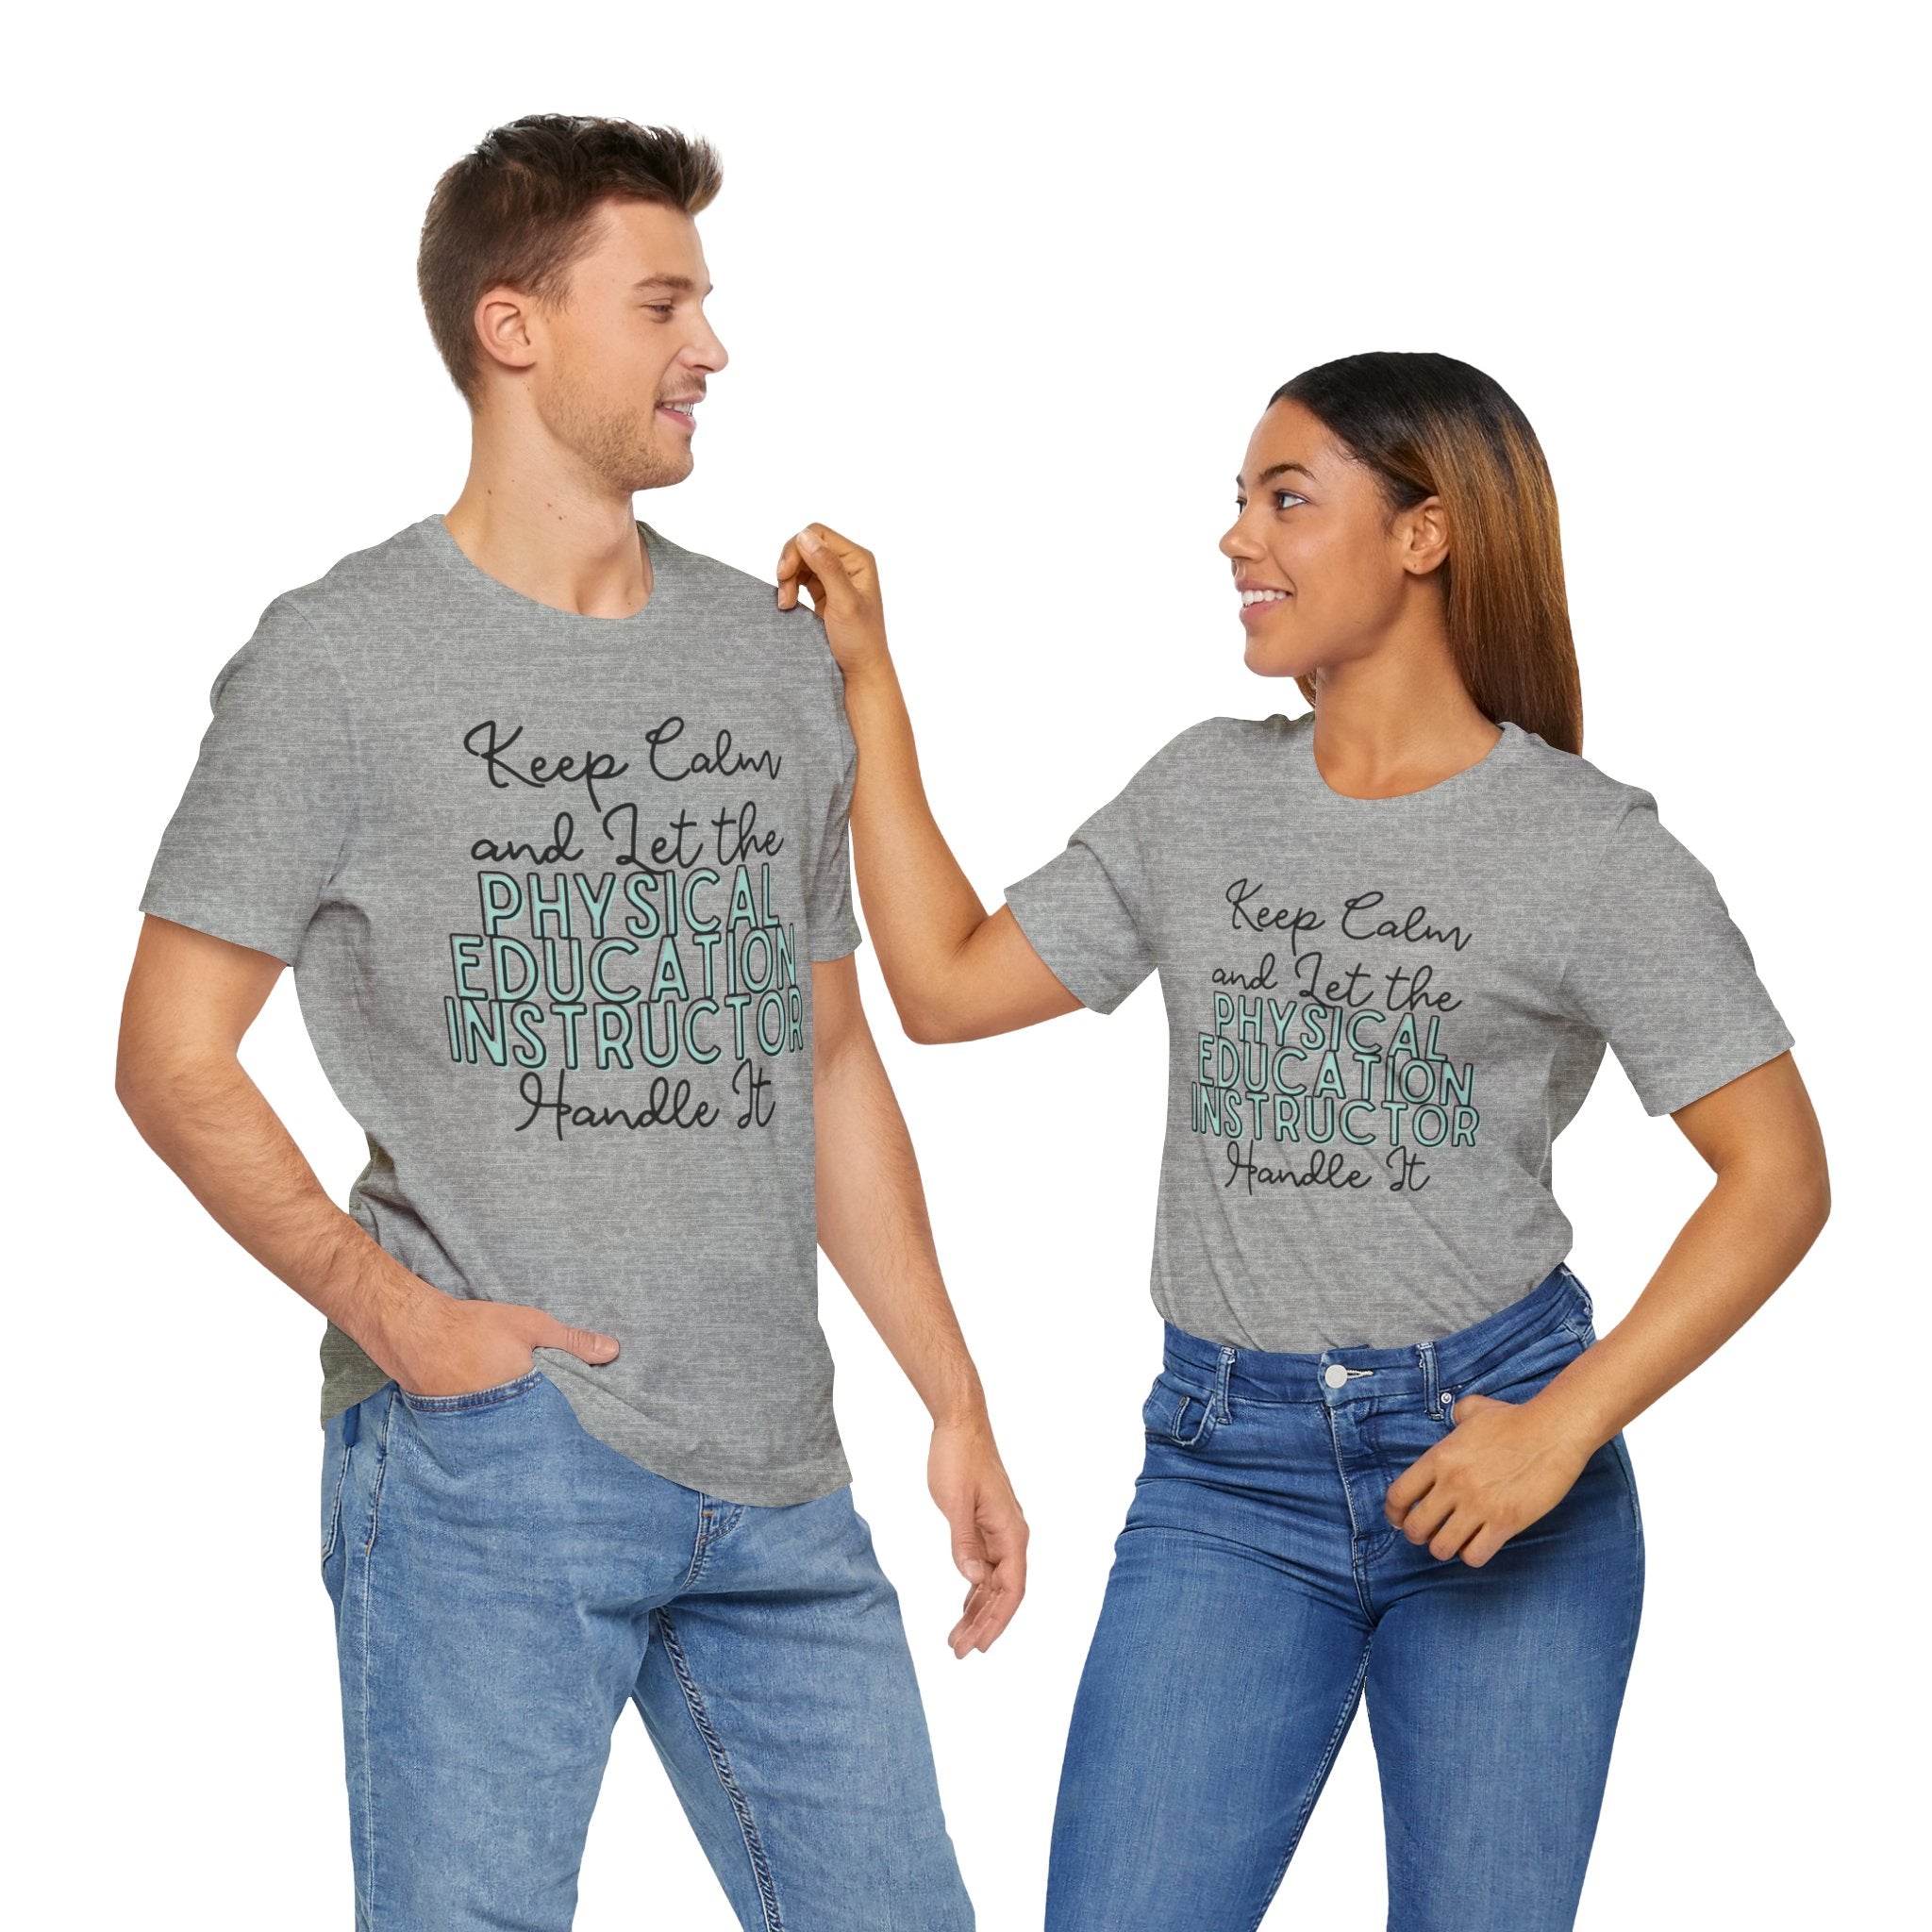 Keep Calm and let the Physical Education Instructor handle It - Jersey Short Sleeve Tee